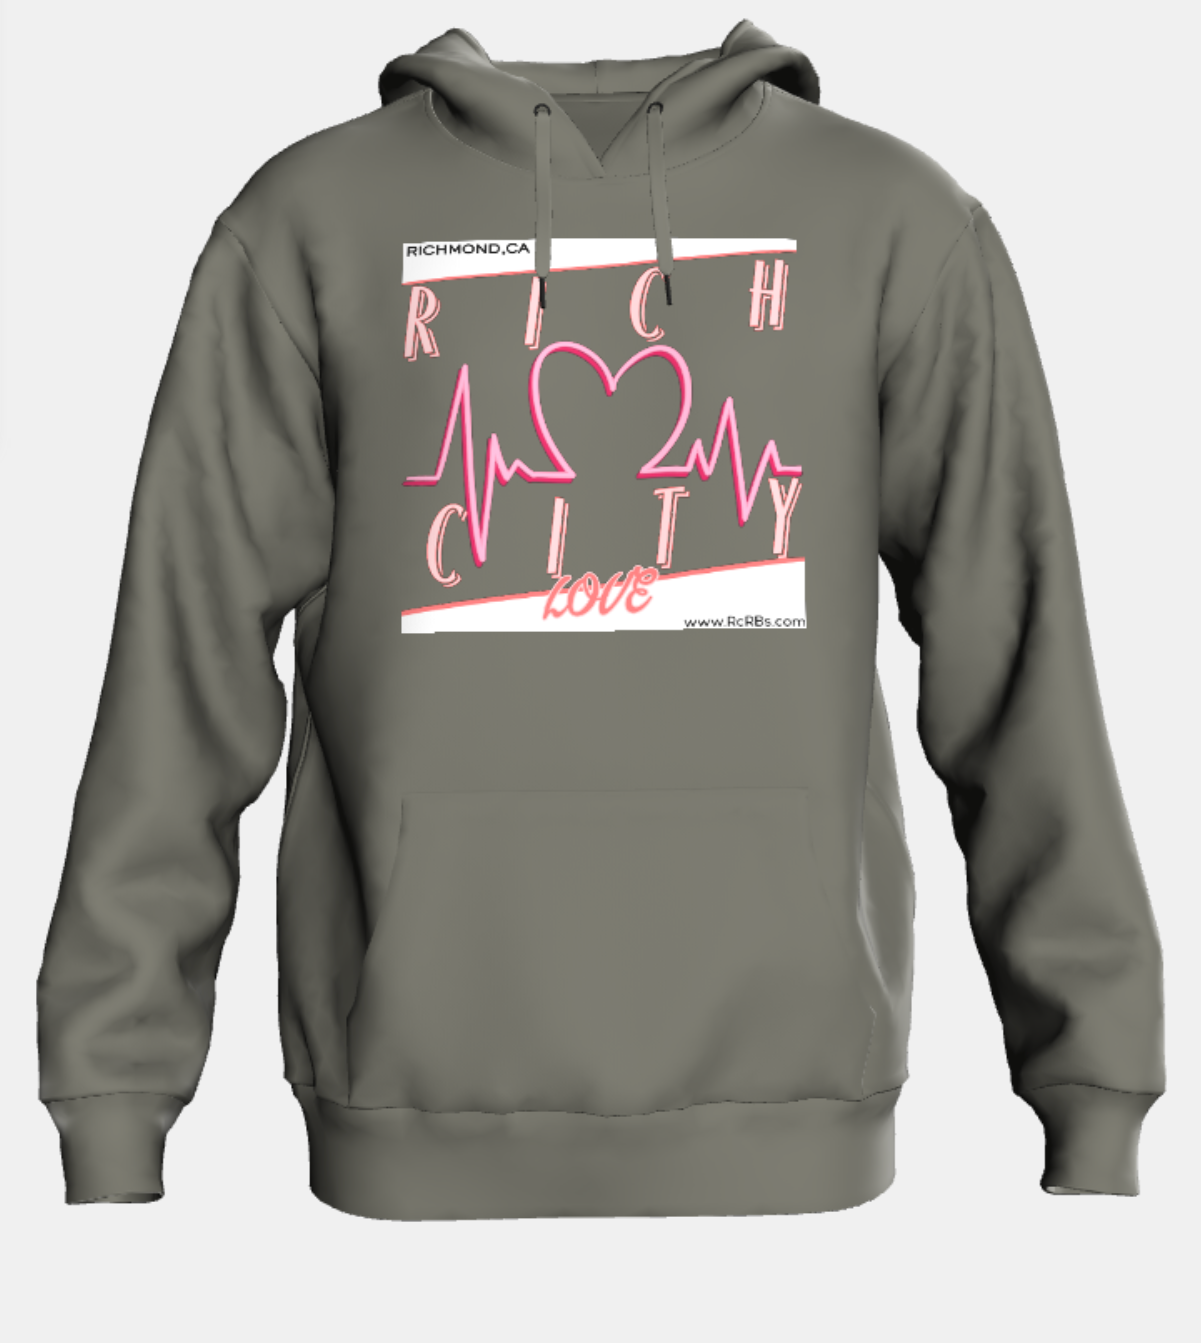 "Evry1's Brand" RichCity Rides Bike/Skate Cooperative -"LOVE" hoodie - Sustainable Clothing Collection